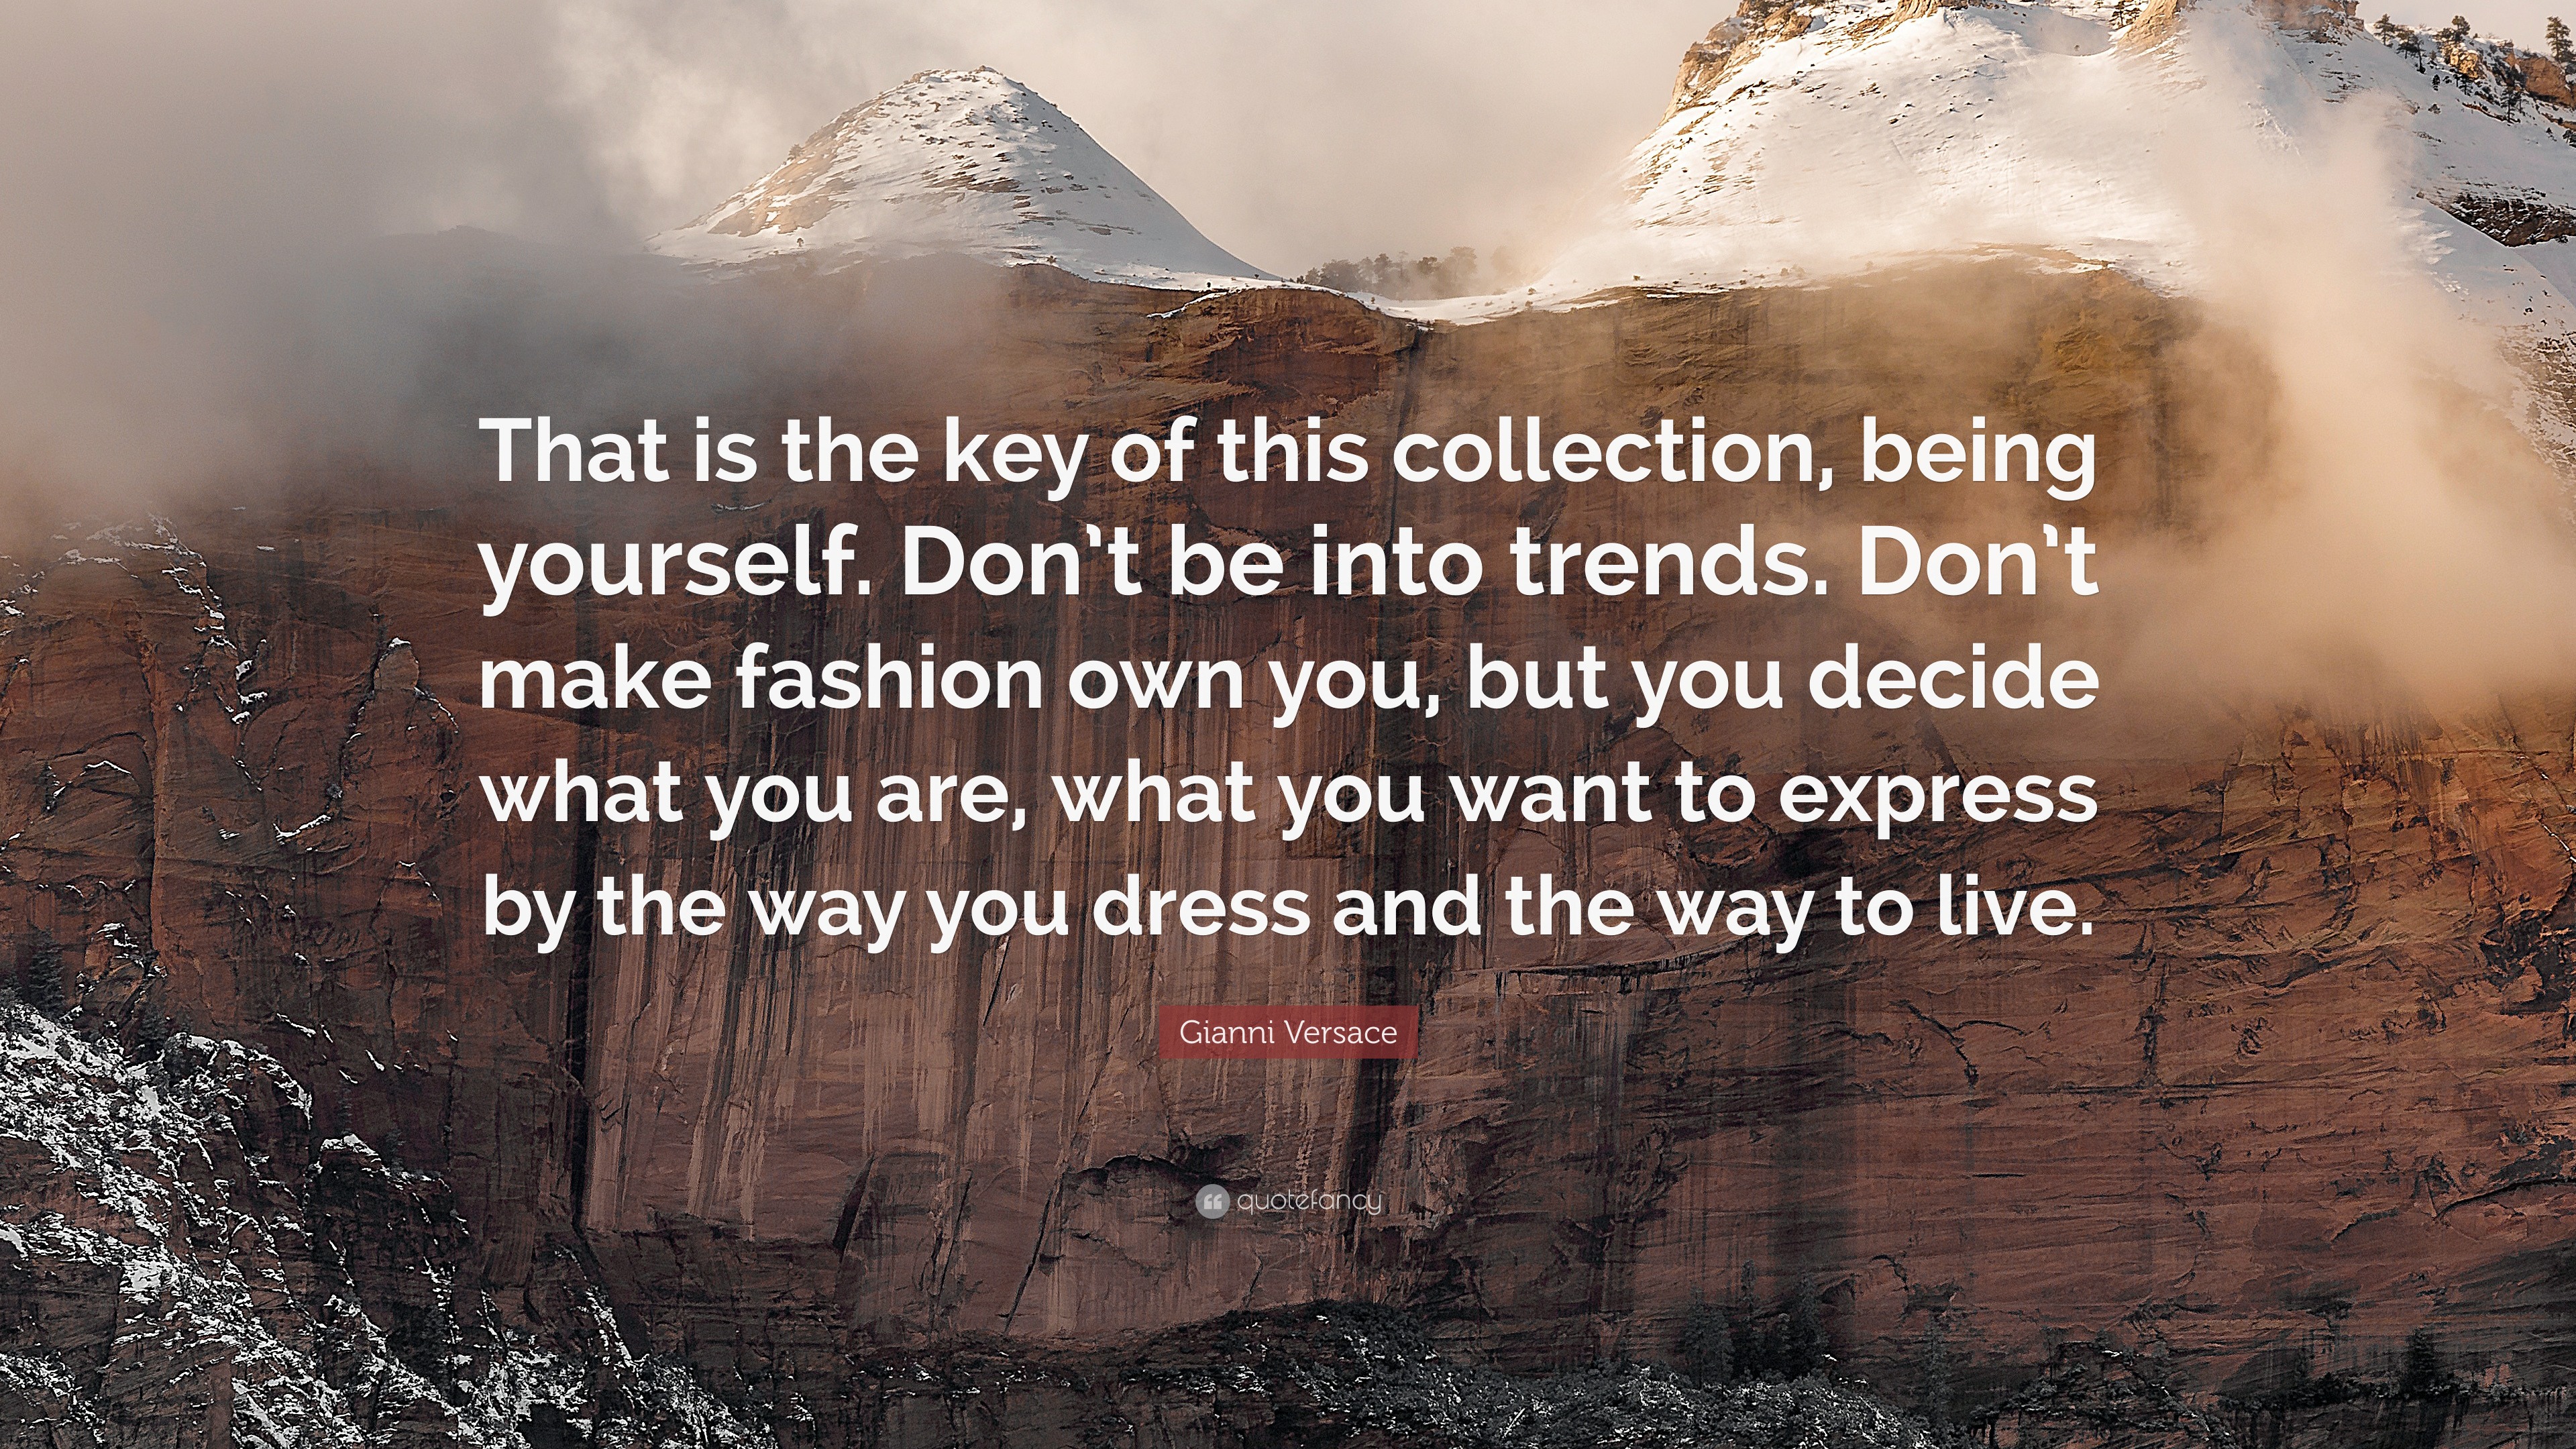 Gianni Versace Quote: “That is the key of this collection, being ...